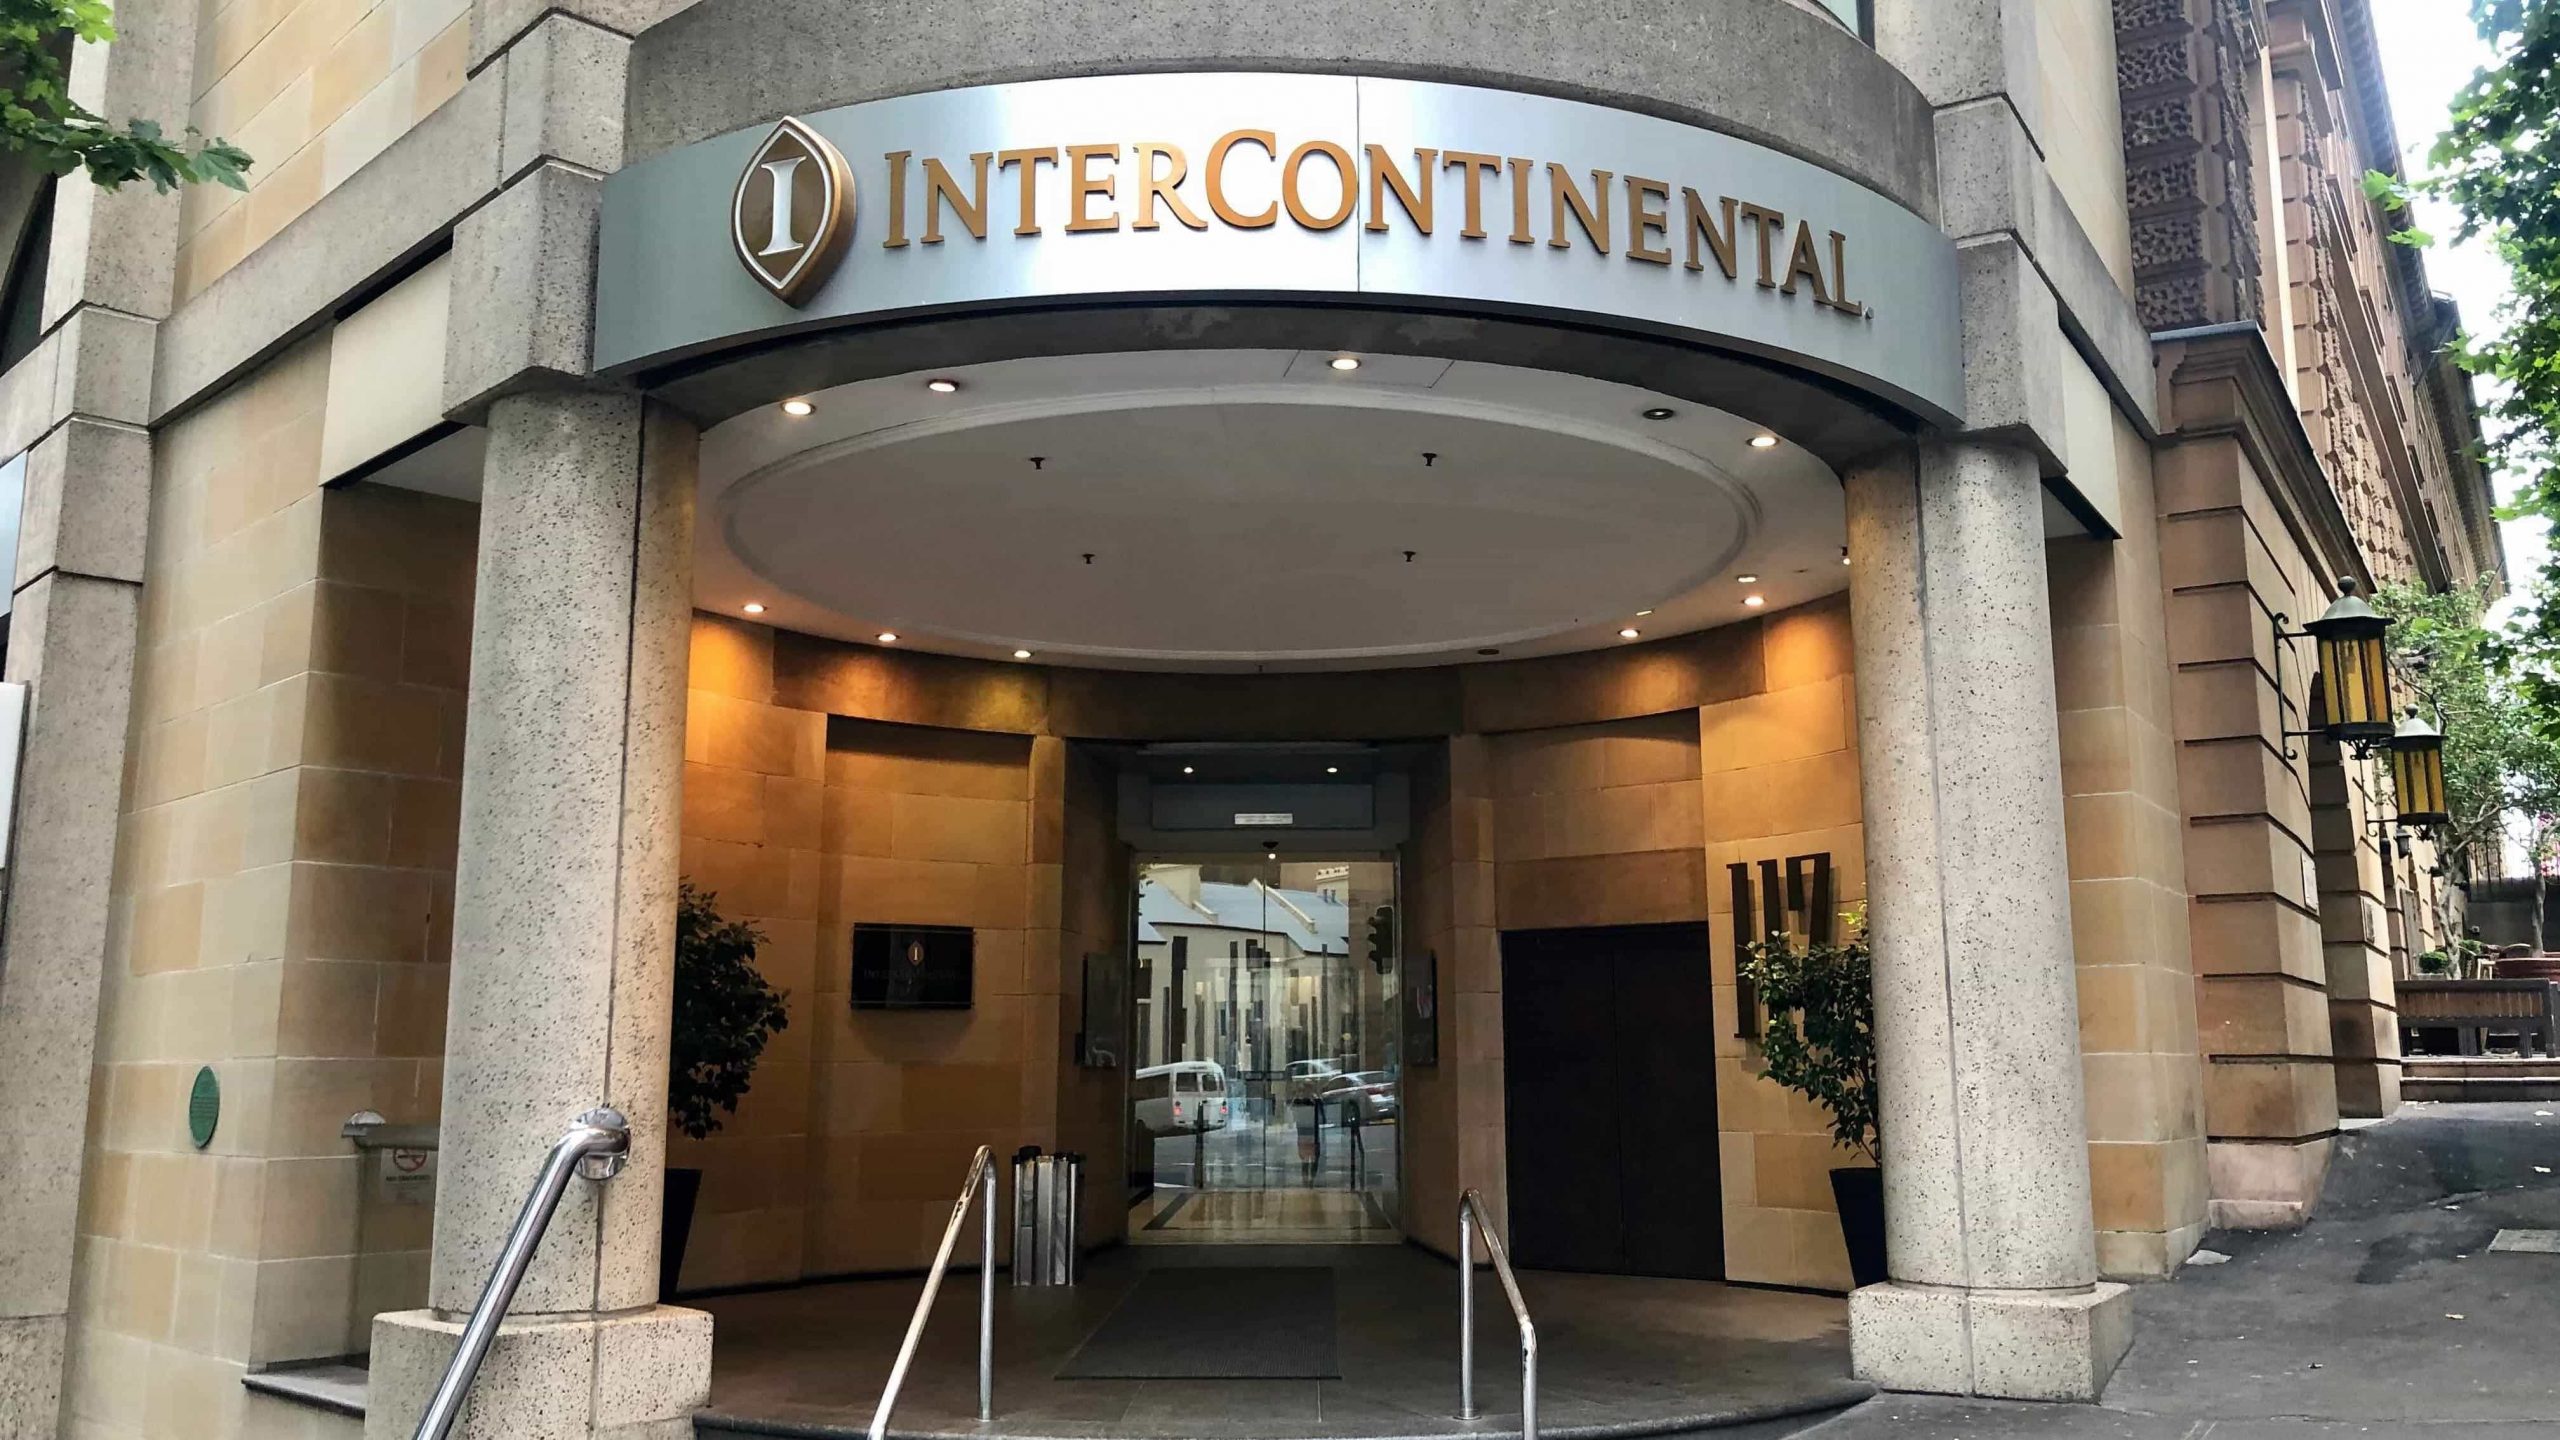 Review: InterContinental, Sydney - Point Hacks